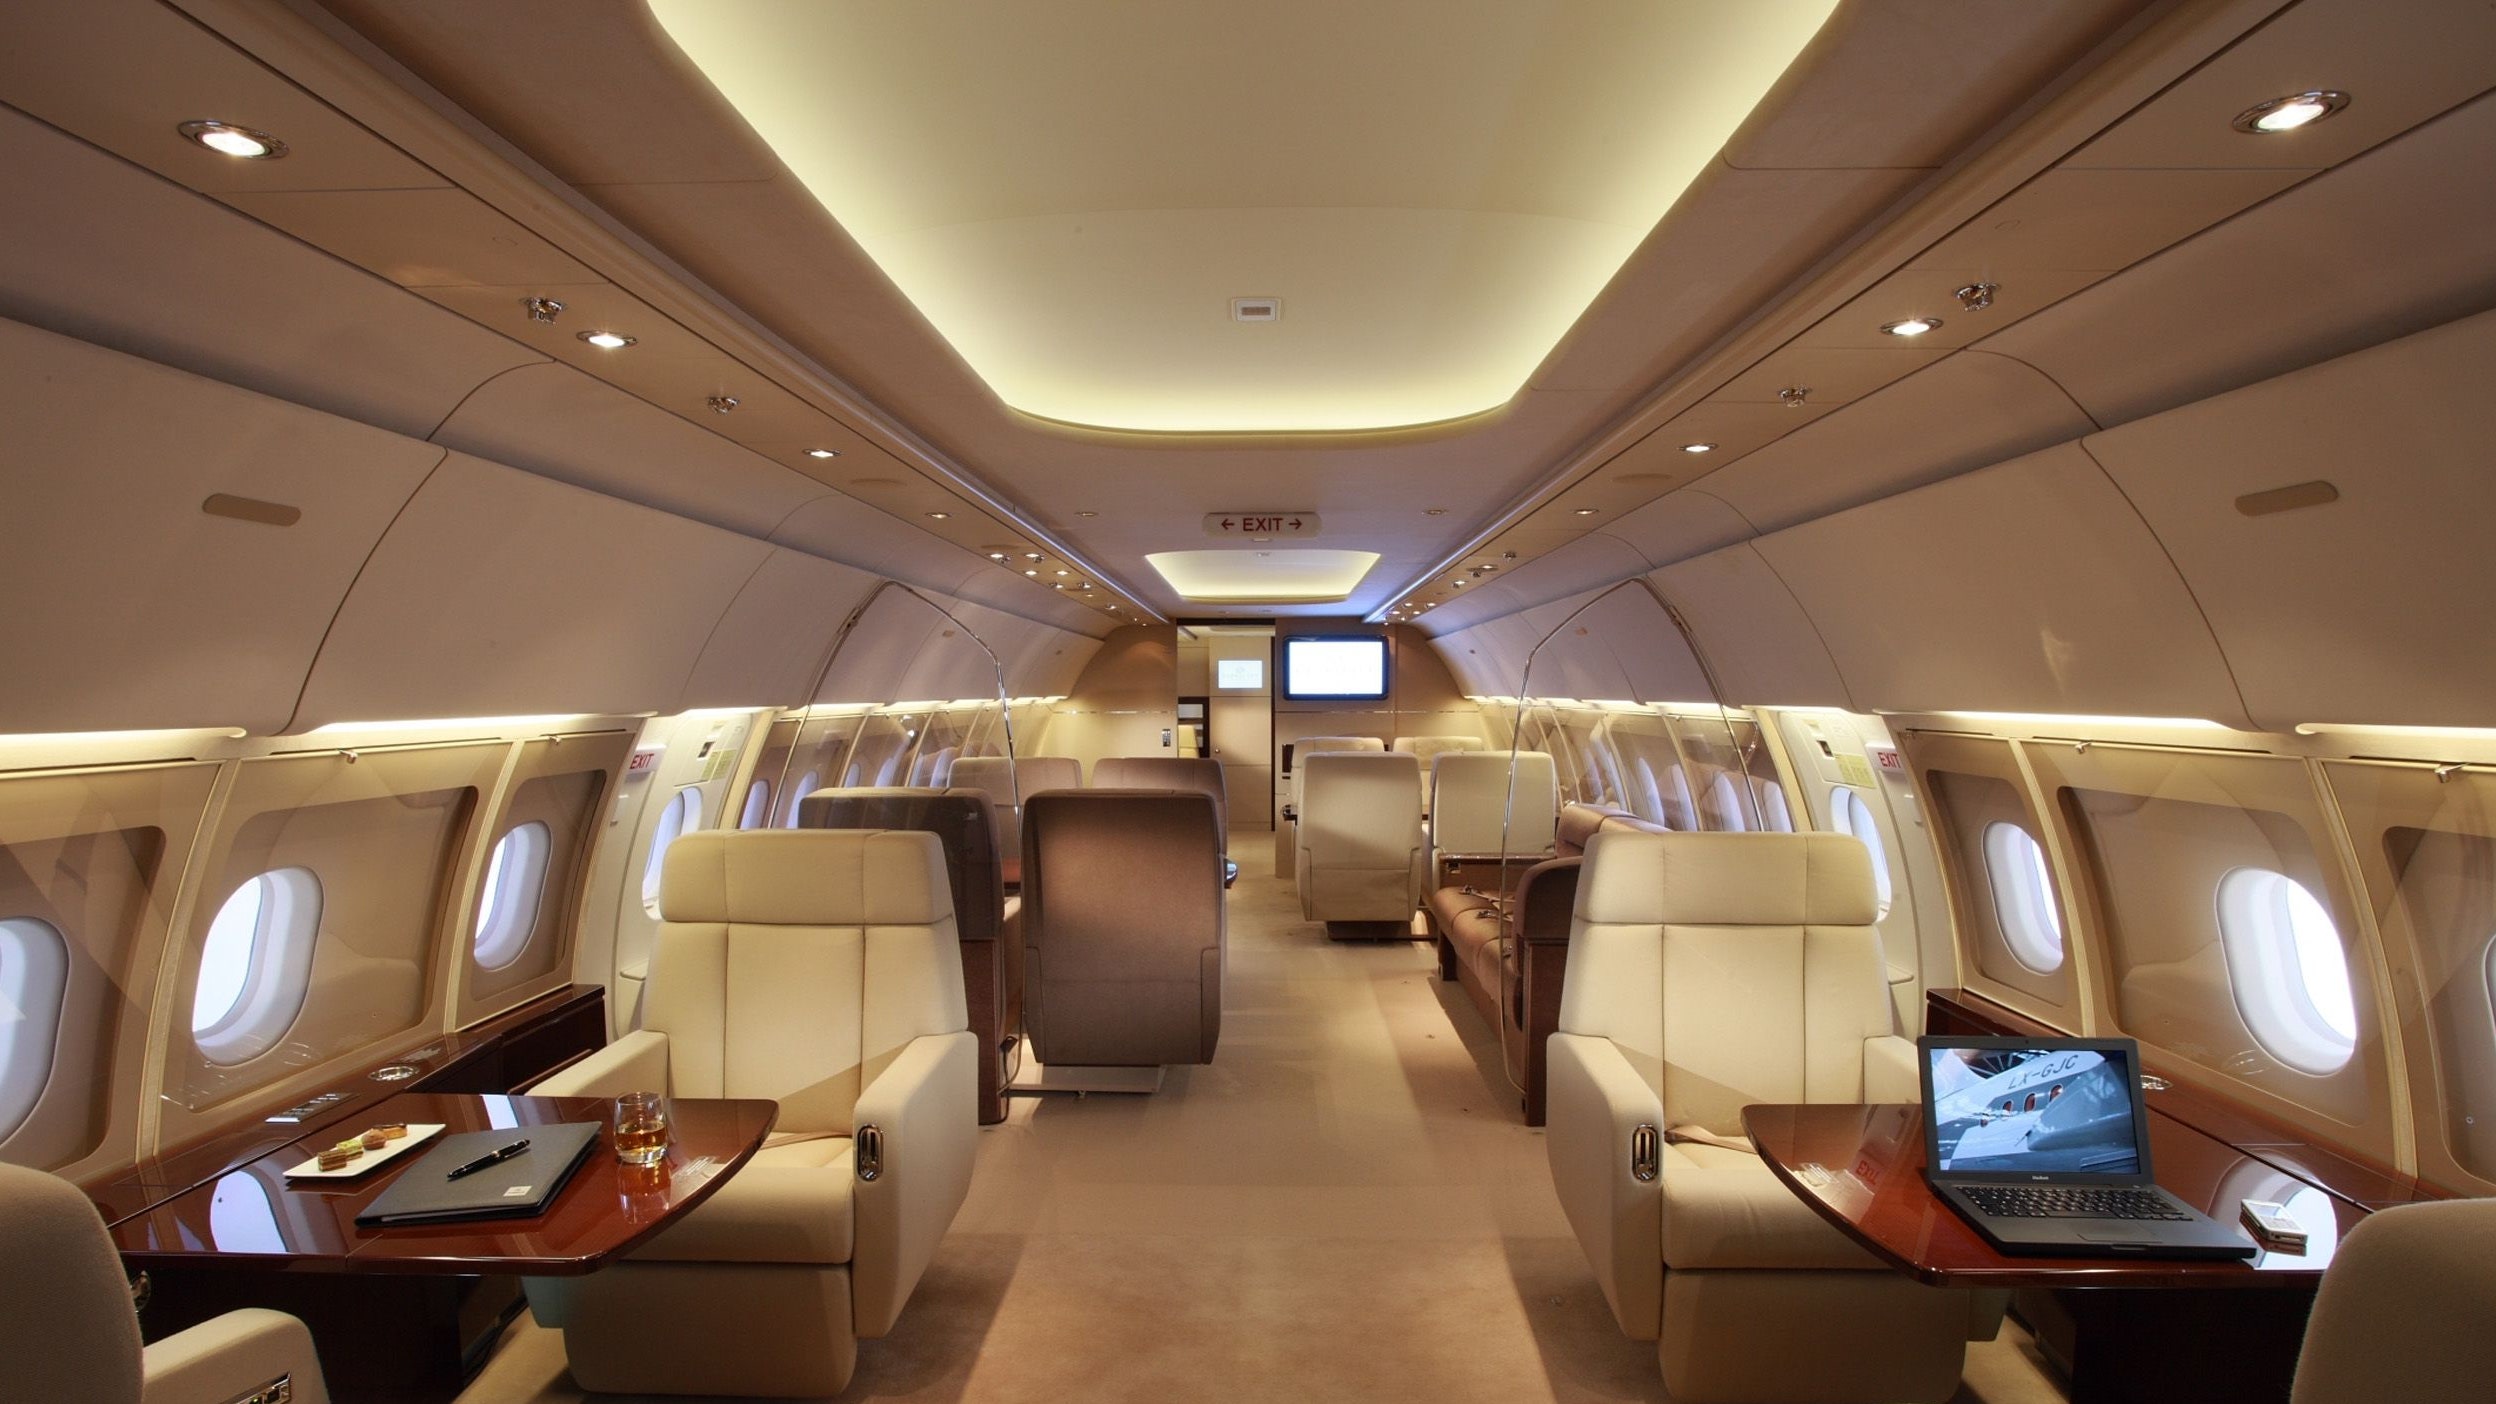 The Most Luxurious Private Jets in the World